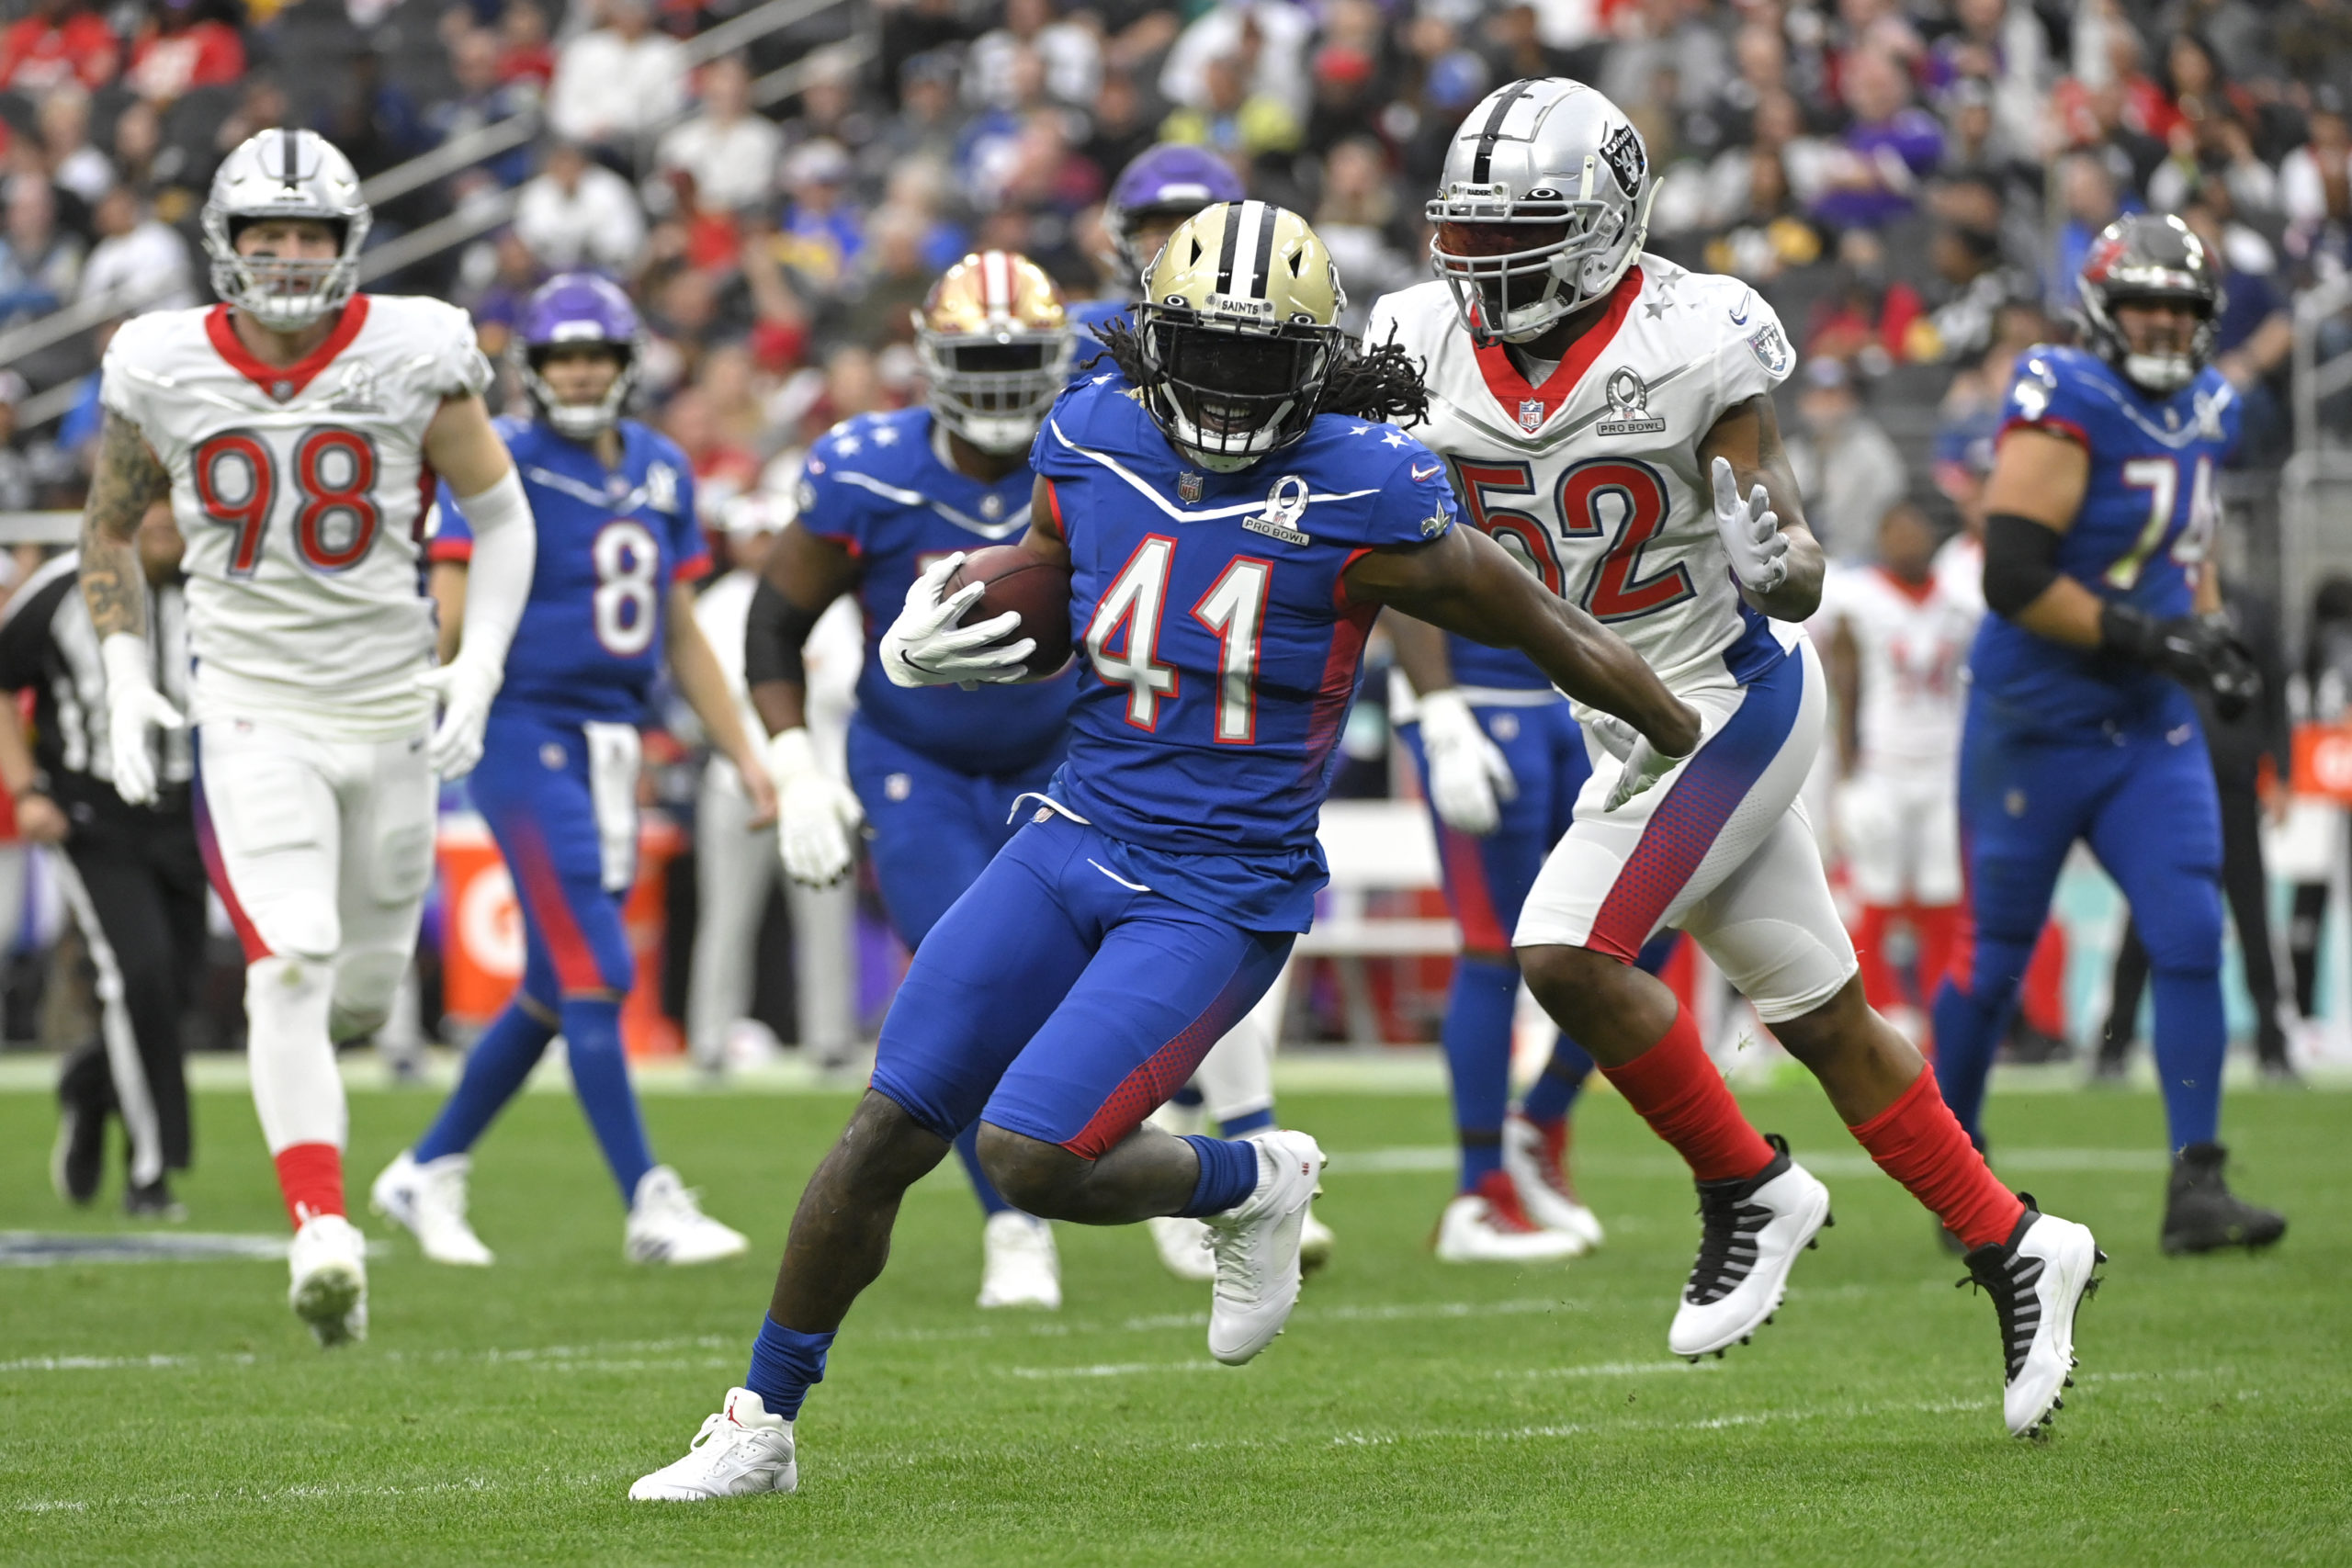 NFC running back Alvin Kamara (41) of the New Orleans Saints rushes during the first half of the NFL's Pro Bowl on Feb. 6, 2022.